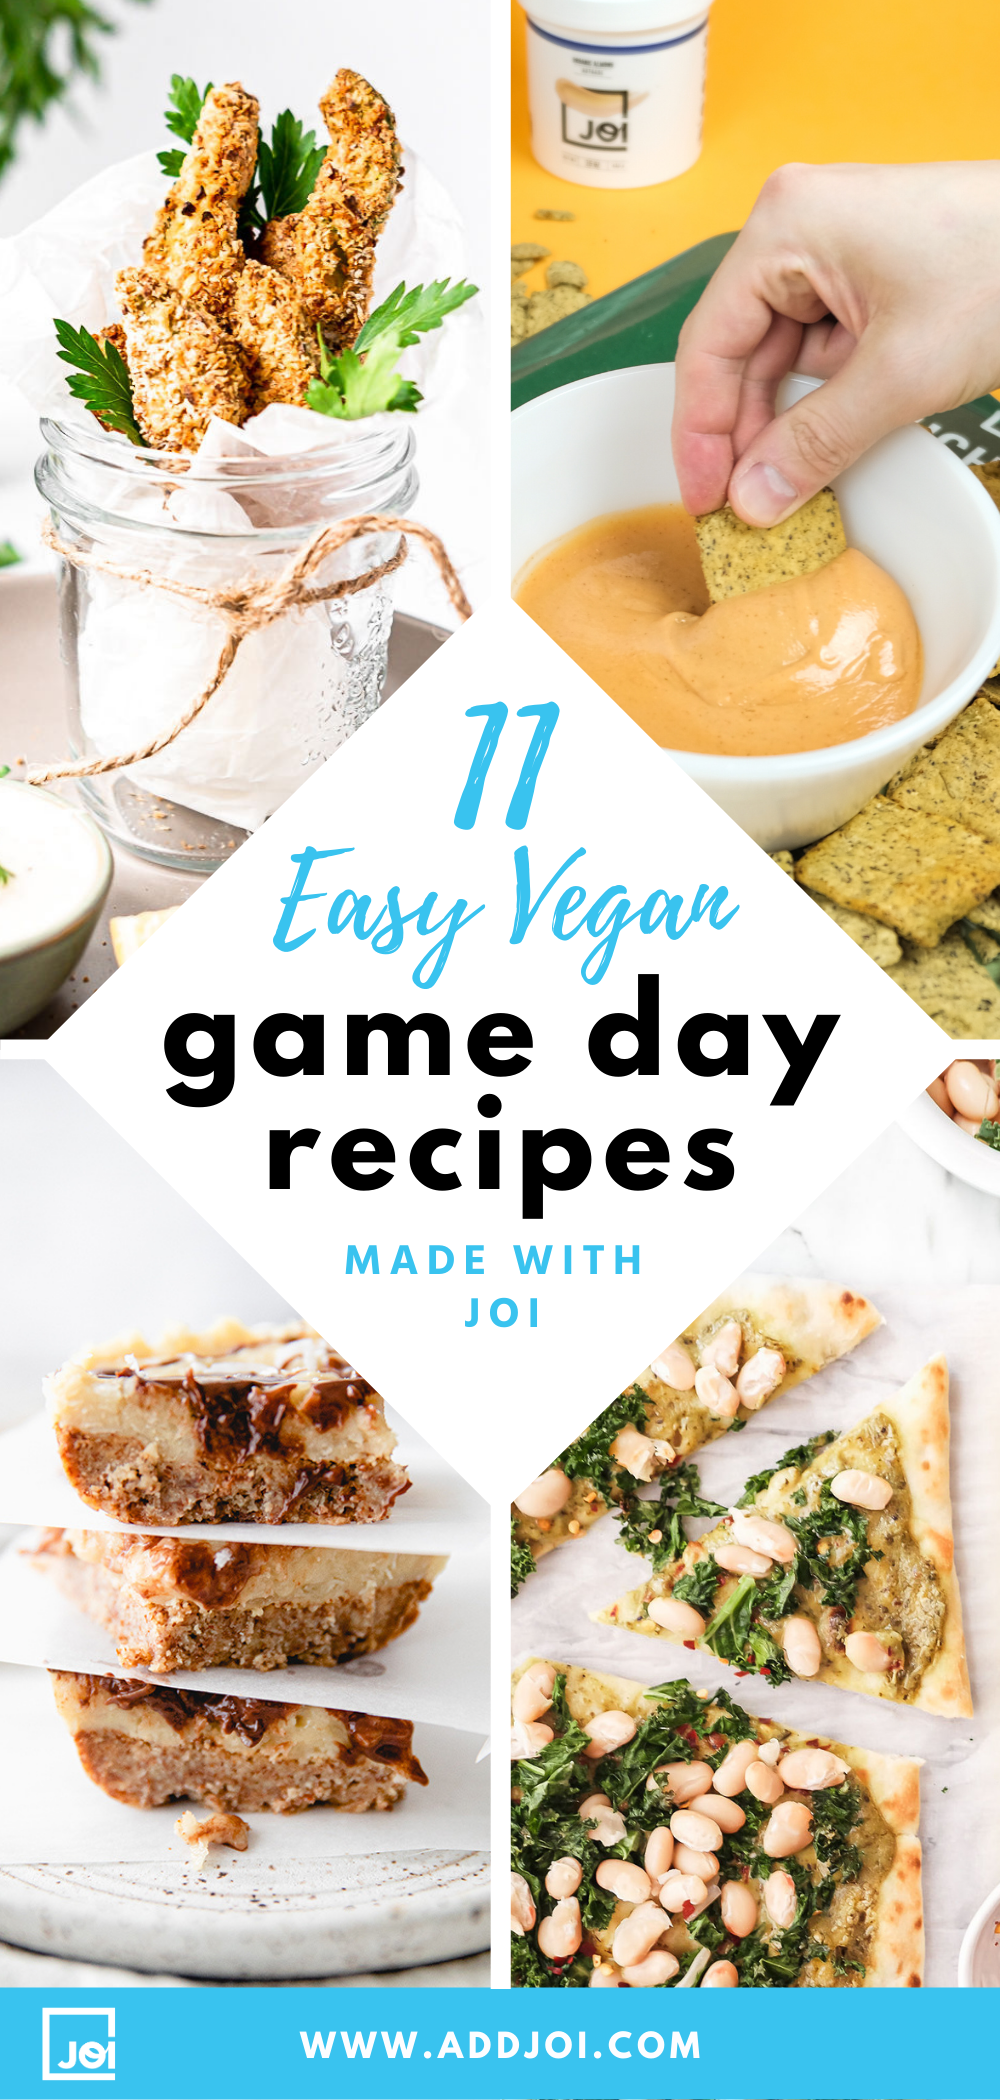 11 Favorite Healthy Game Day Recipes Made with JOI